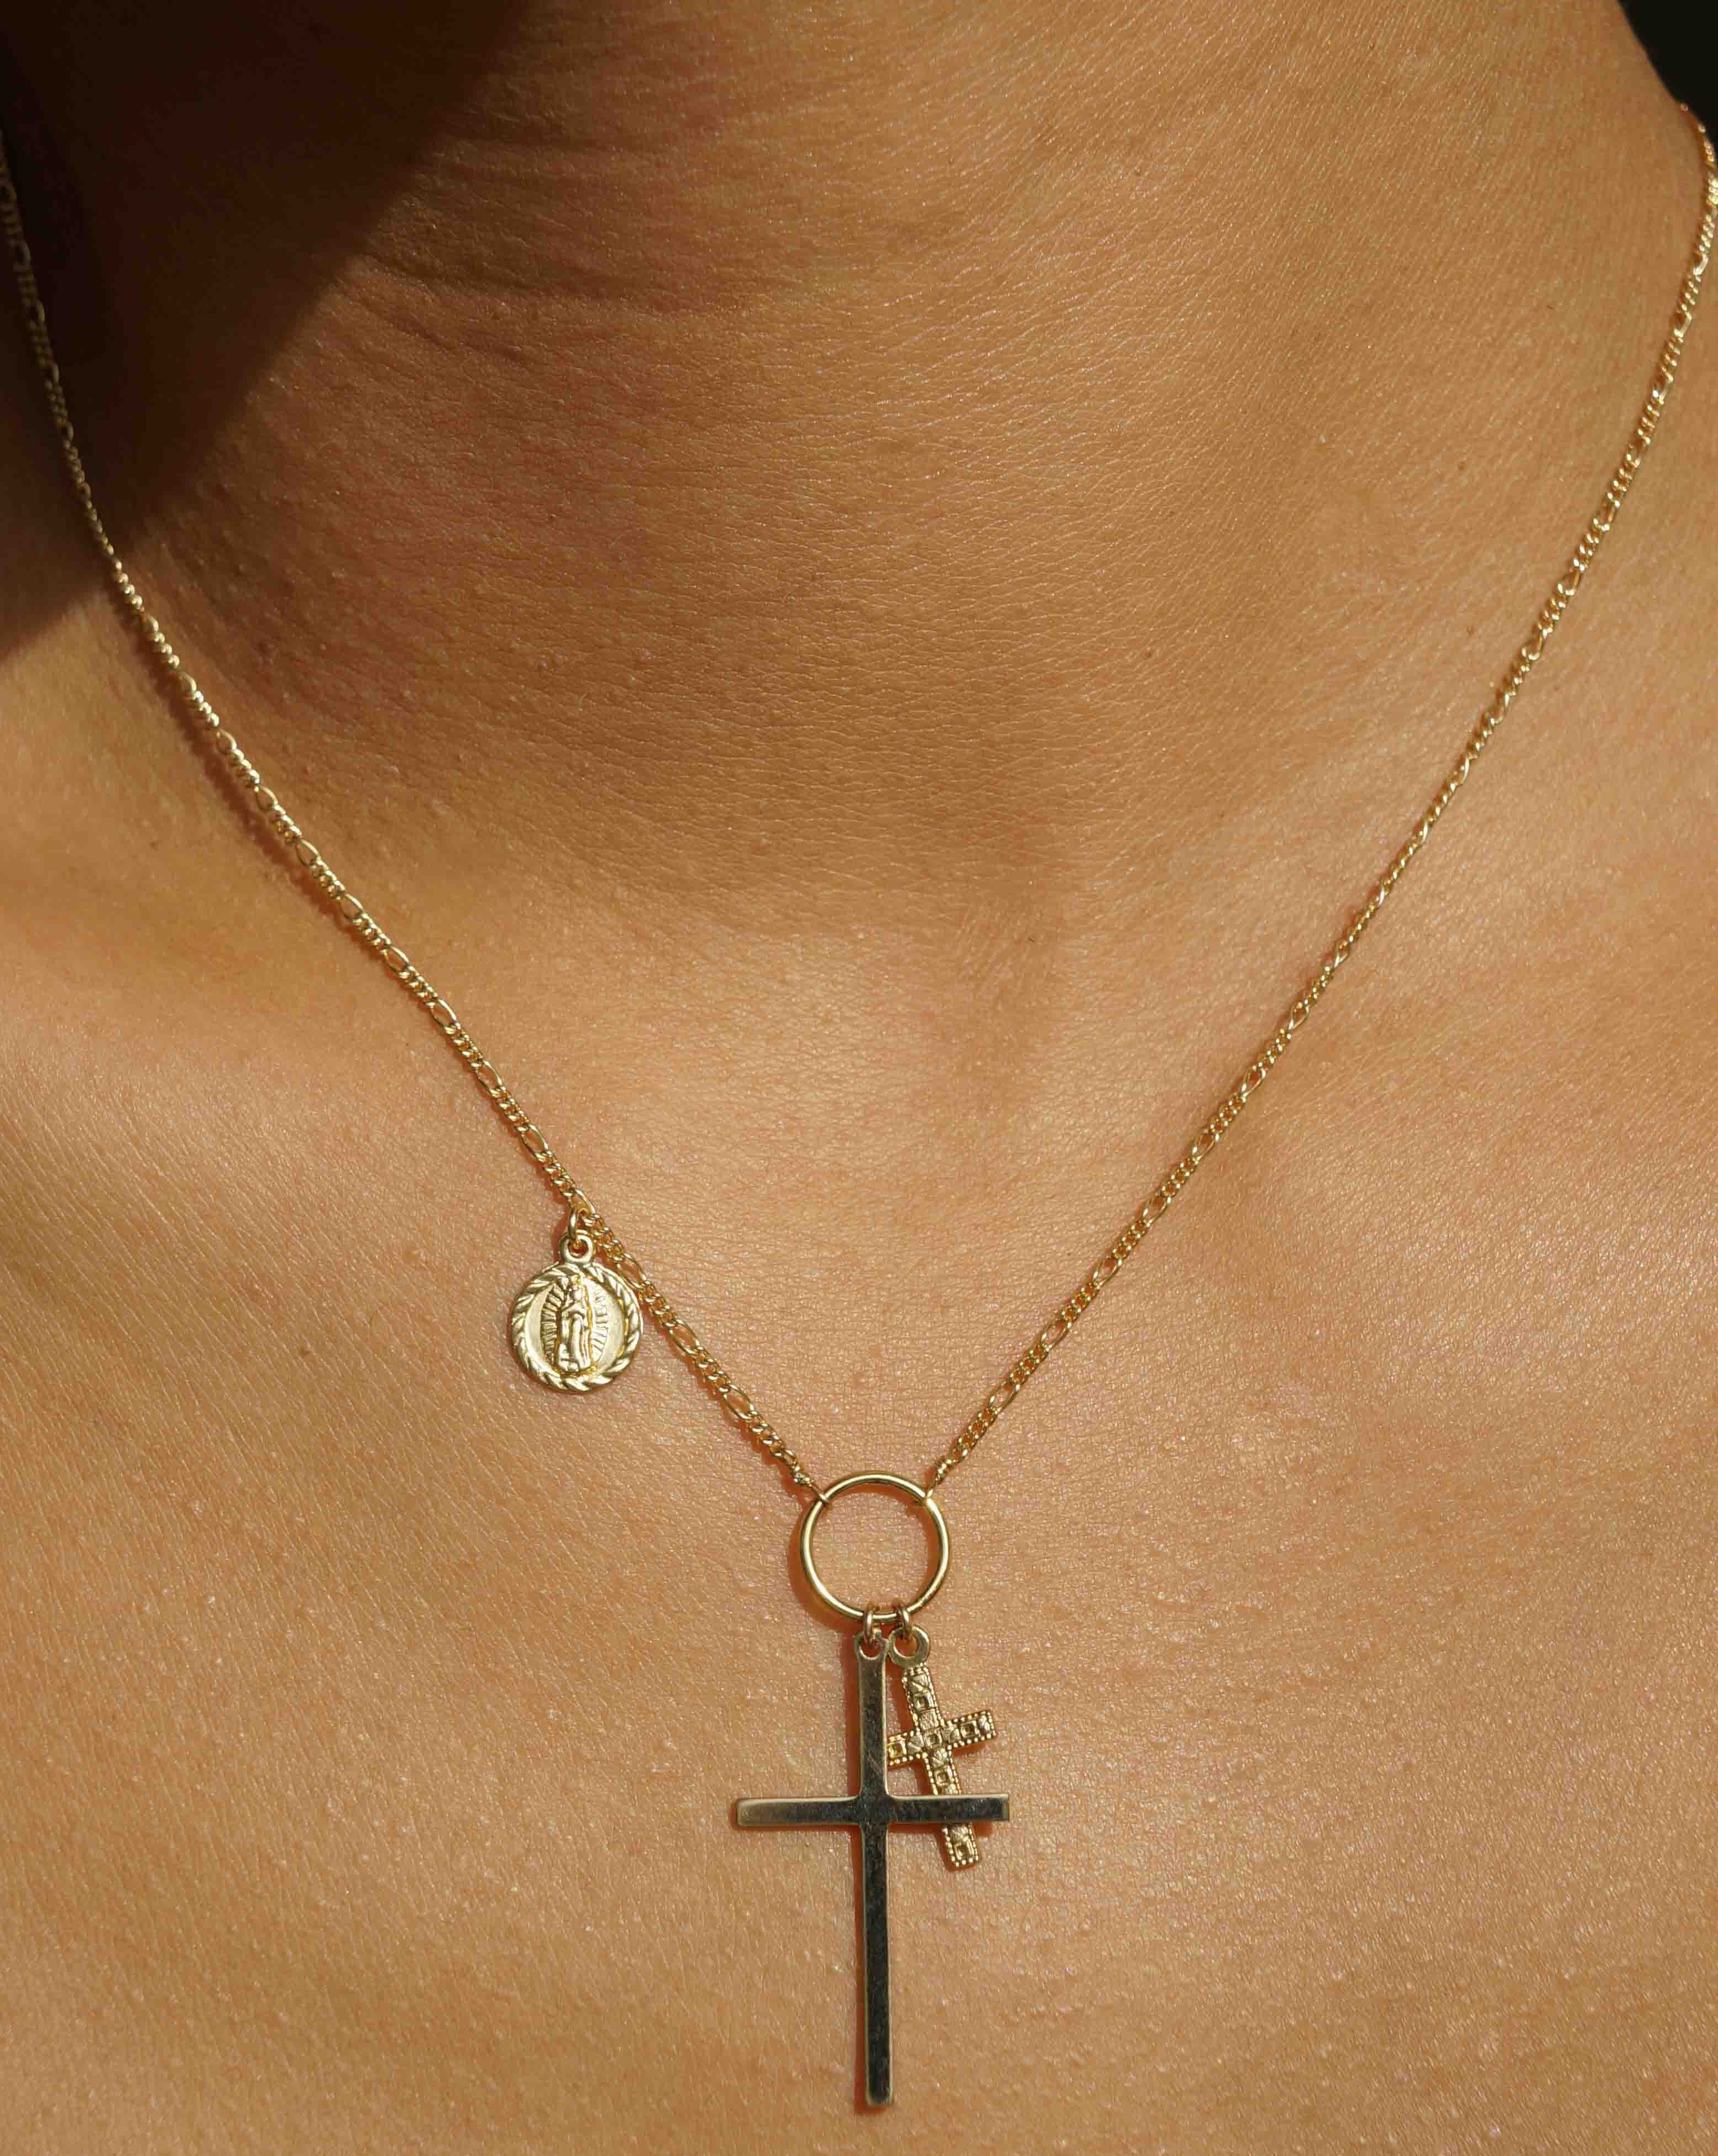 Salvator Necklace by KOZAKH. A 16 to 18 inch adjustable length necklace, crafted in 14K Gold Filled, featuring a Virgin Mary side coin, a 17x30mm flat plan cross, and a 5x10mm Filigree cross.